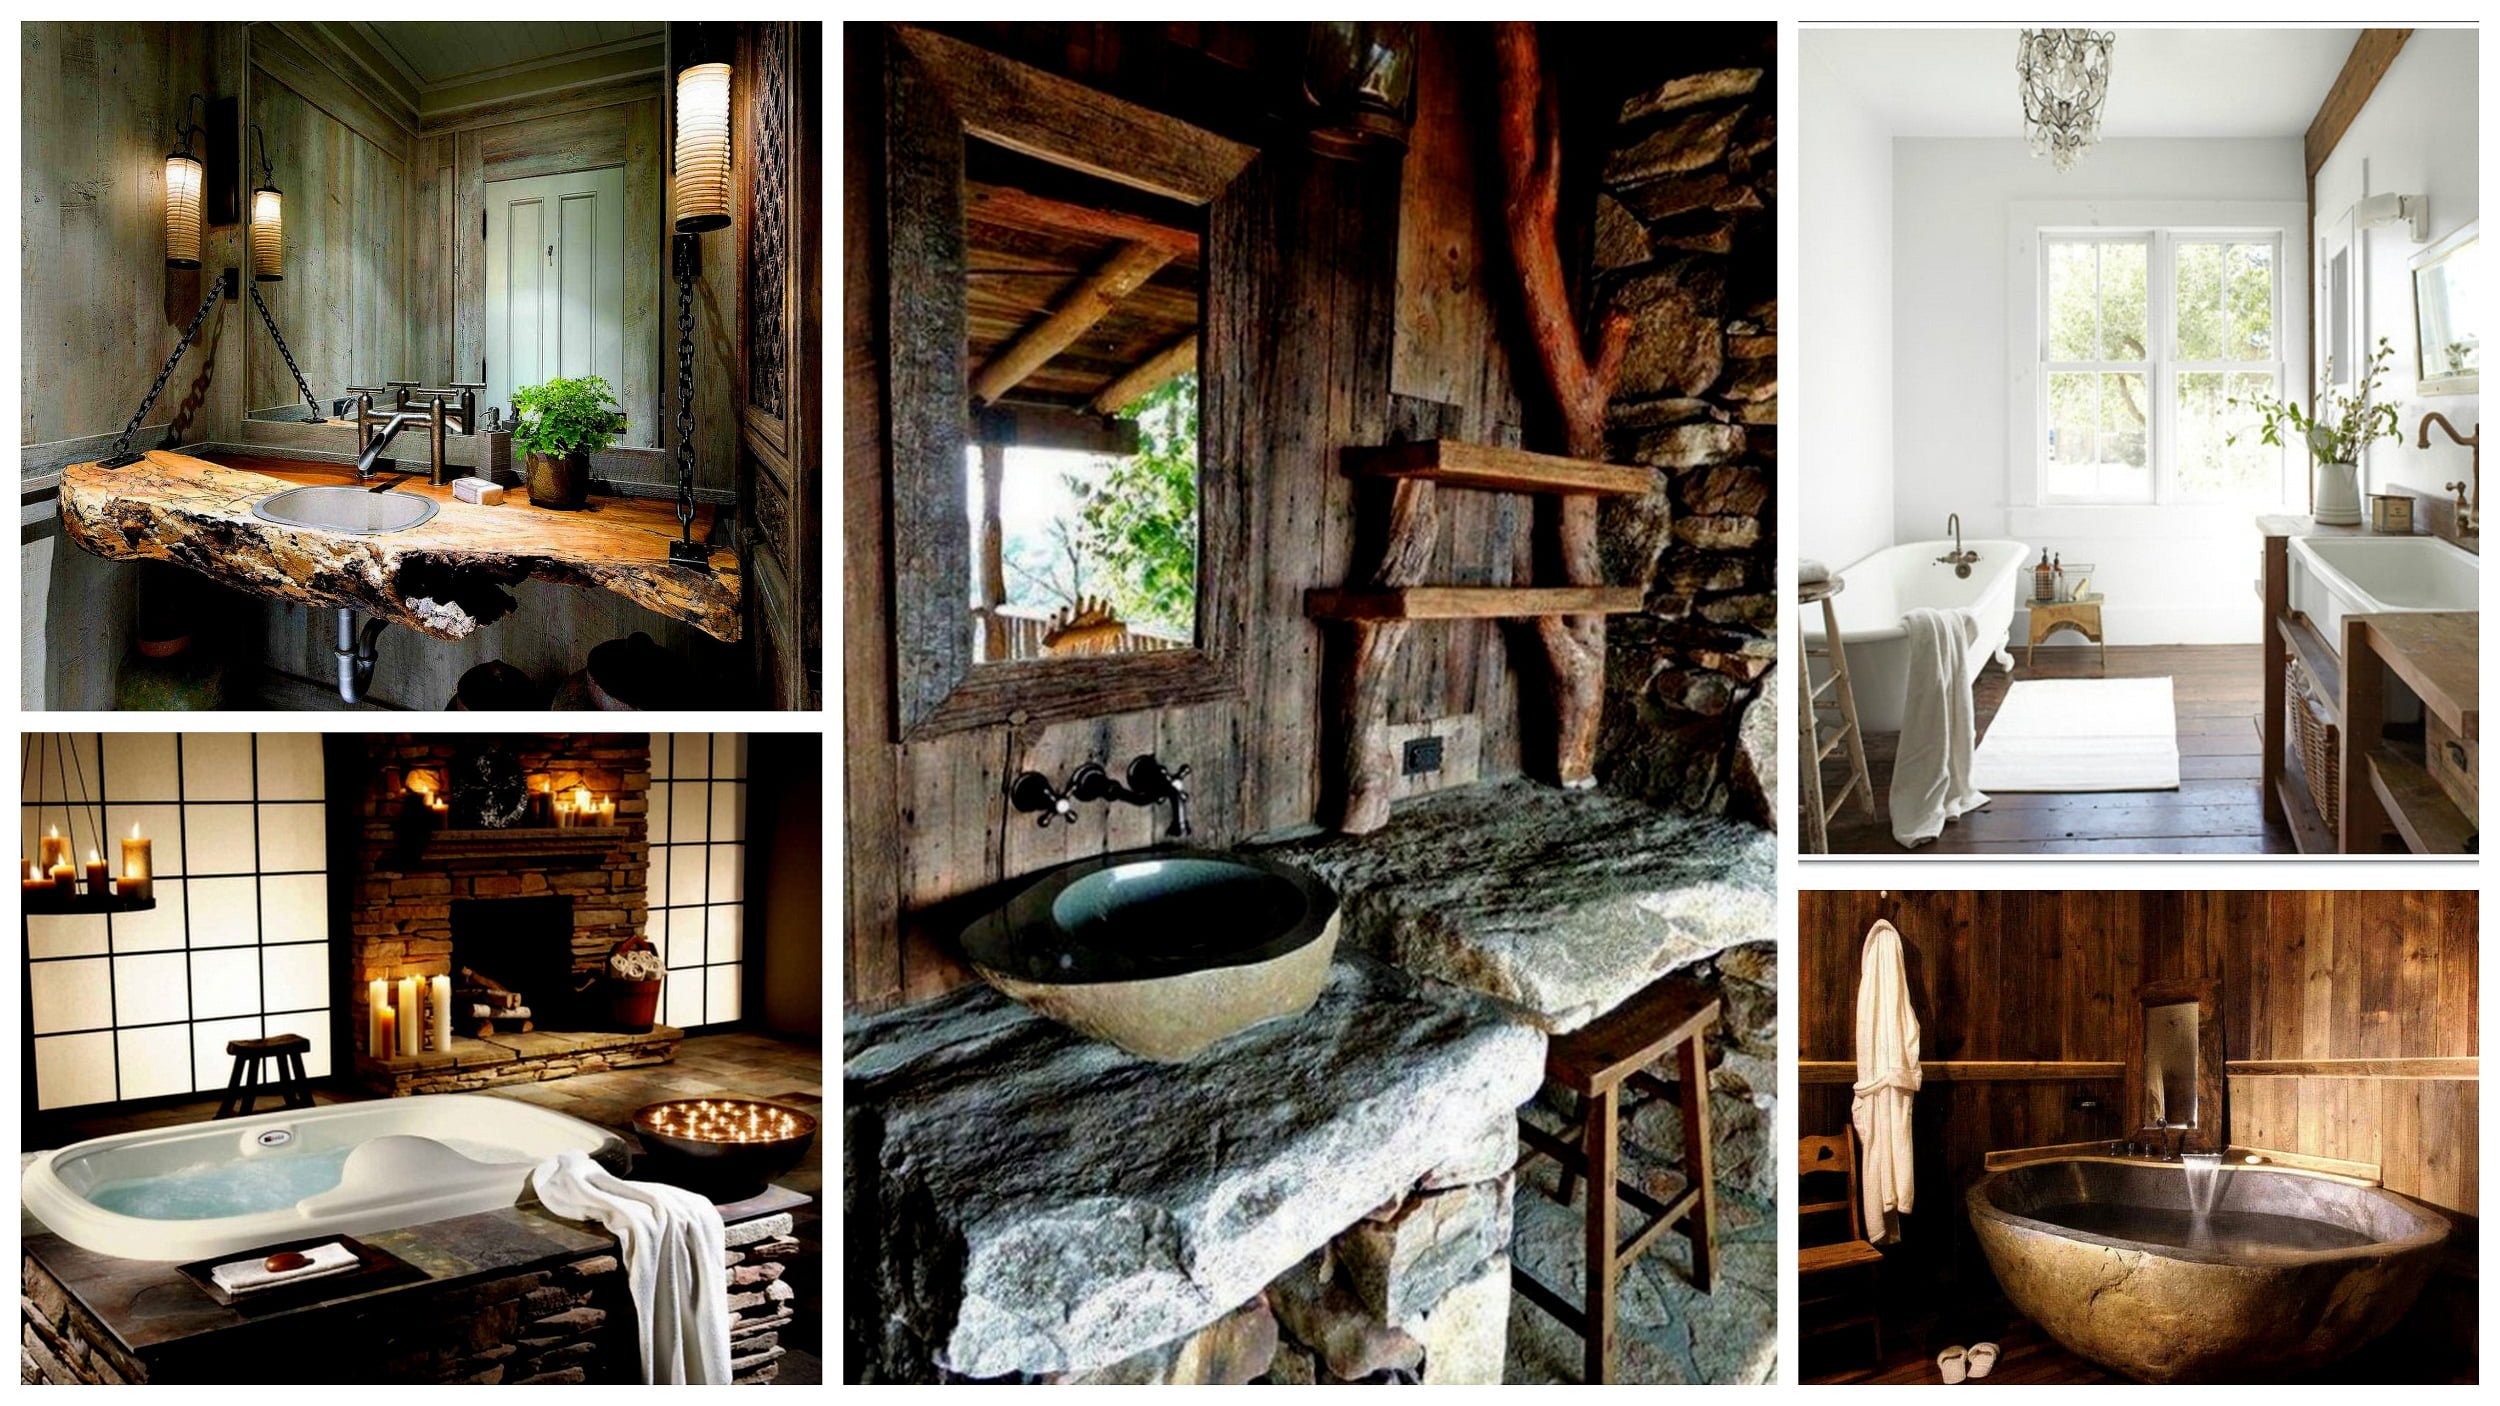 40 Exceptional Rustic Bathroom Designs Filled With Coziness and Warmth